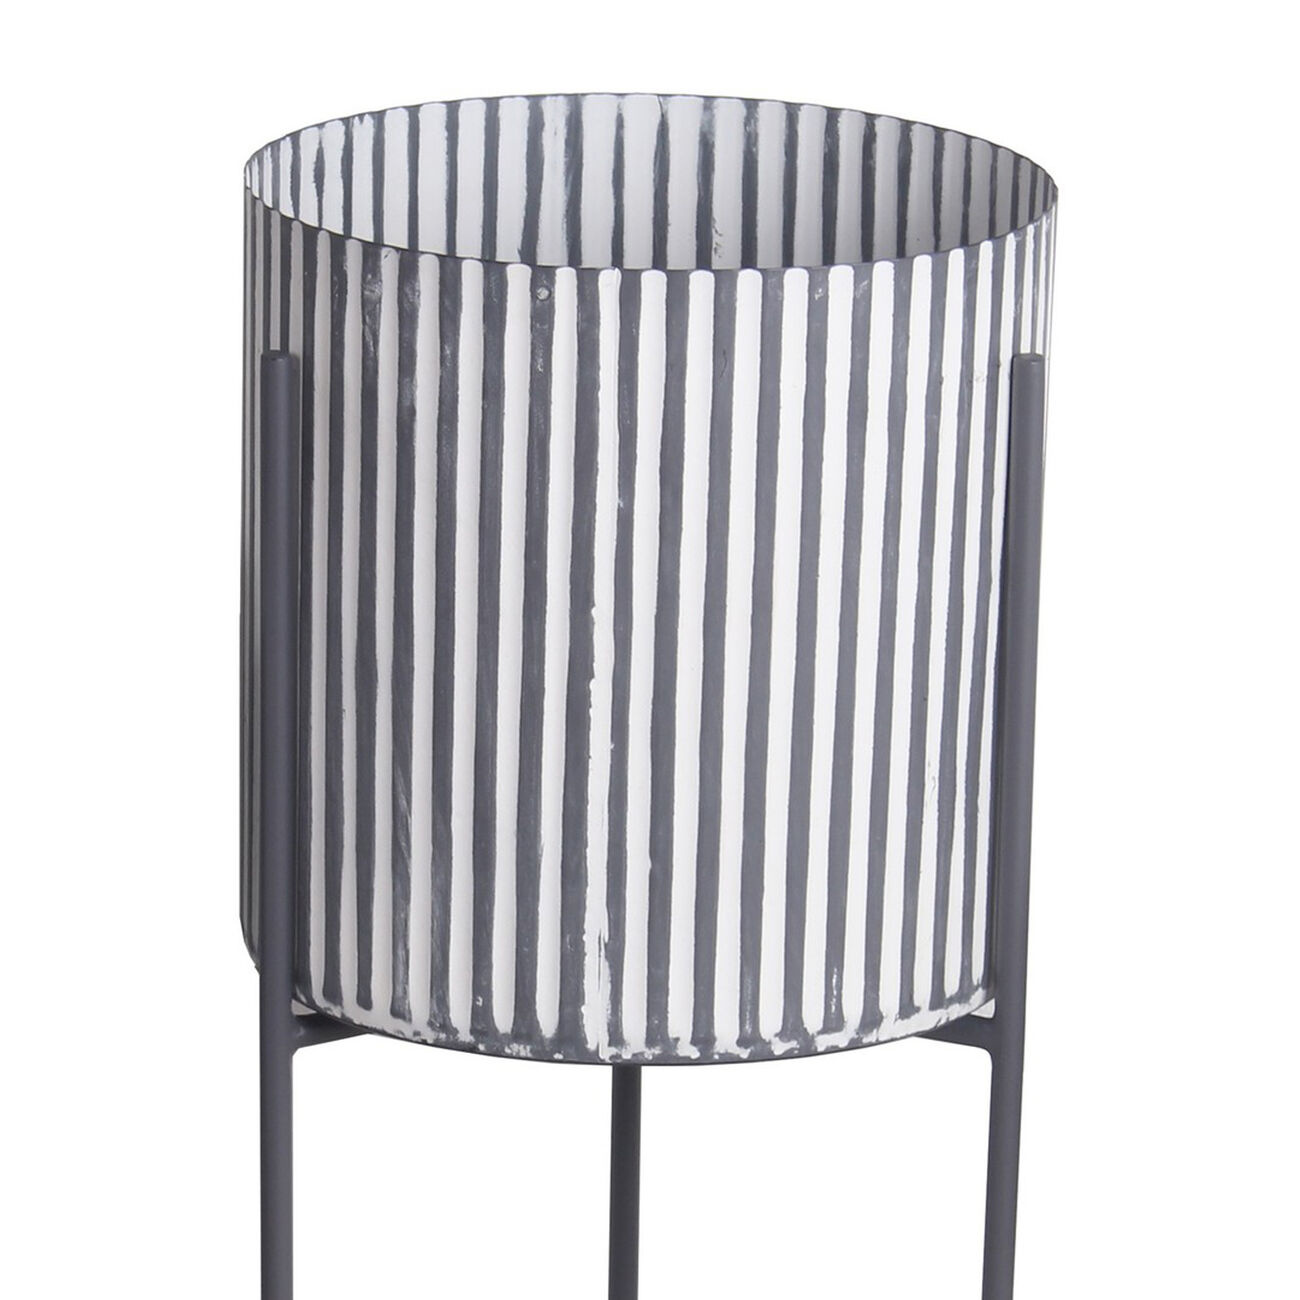 Cylindrical Metal Planter with Corrugated Design, Set of 3, Black and White